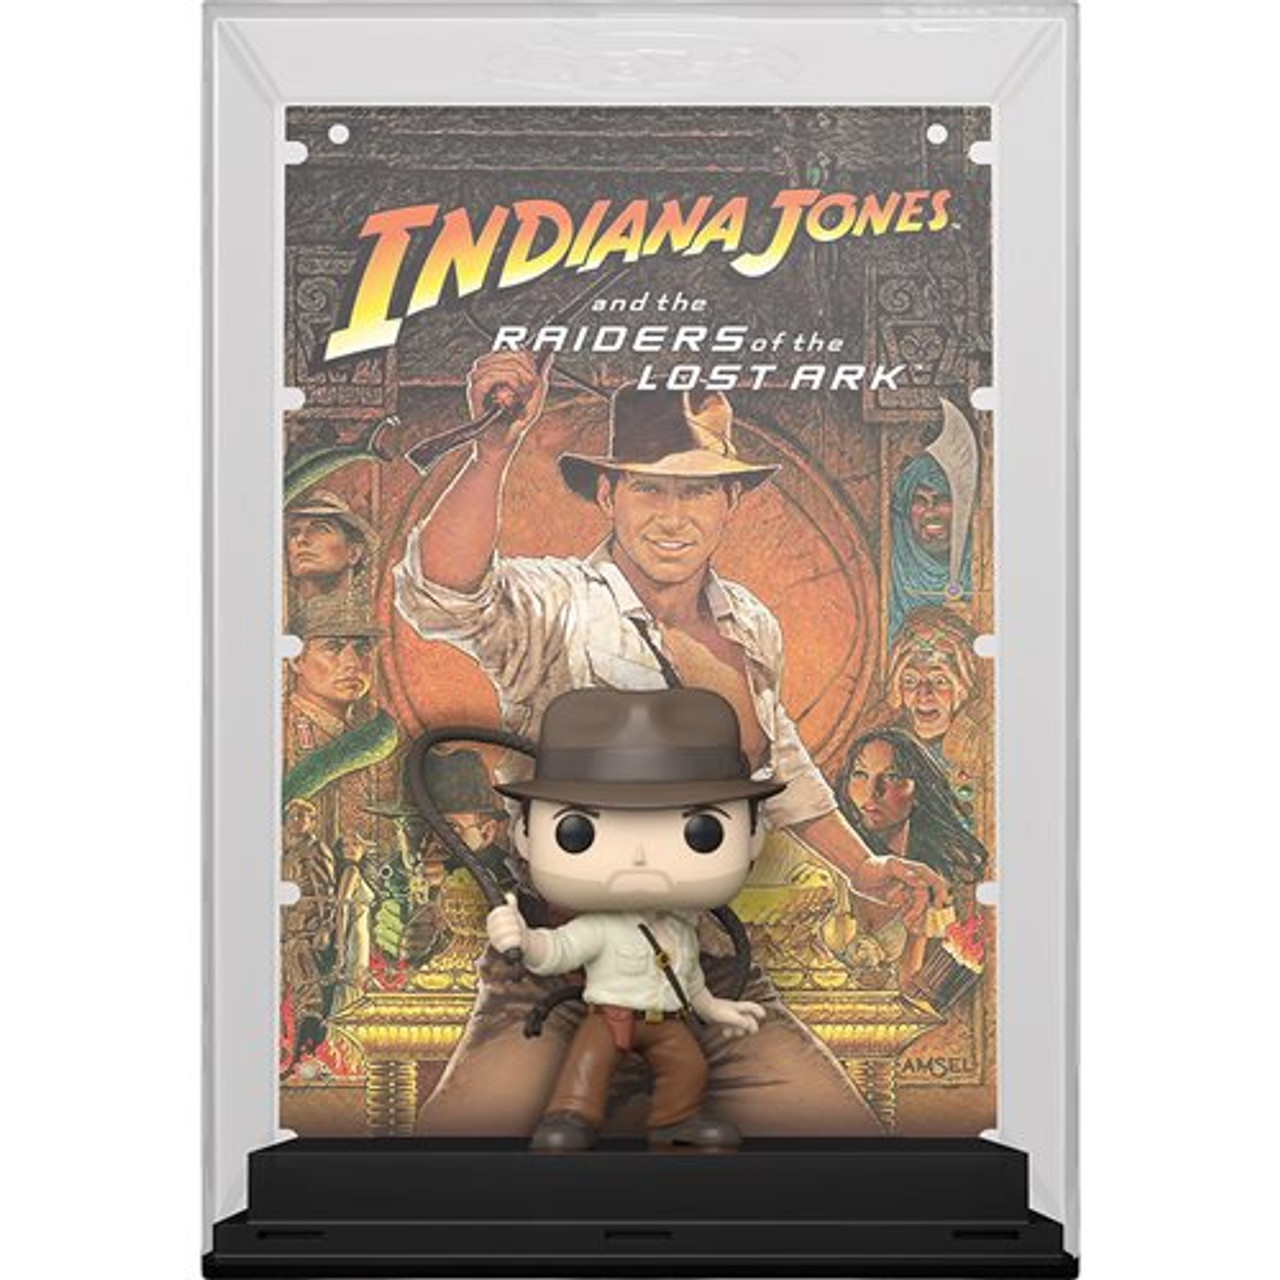 Indiana Jones and Raiders of the Lost Ark Funko Pop! Movie Poster